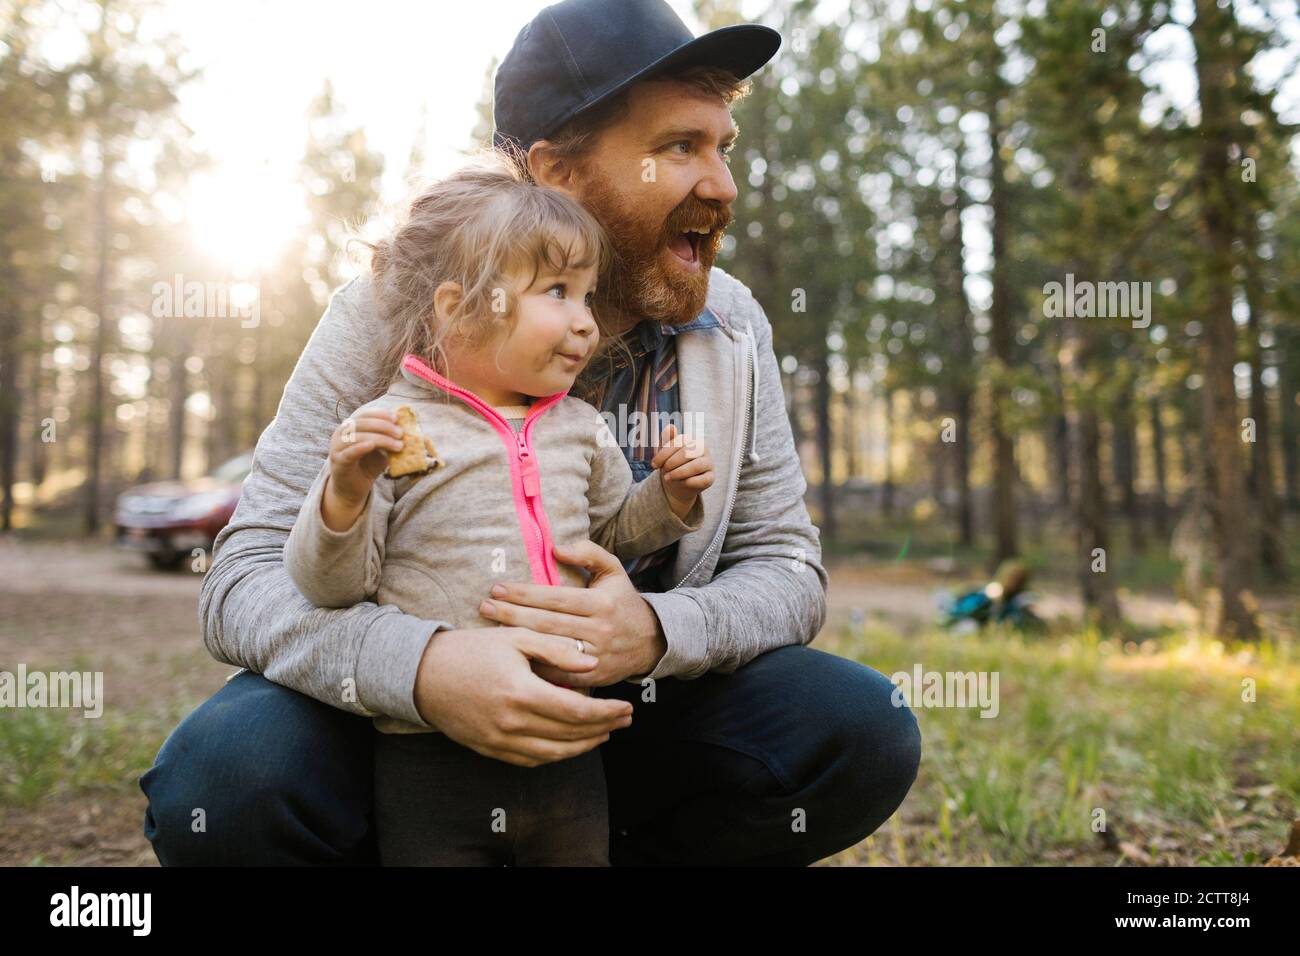 Smiling man with daughter (2-3) on laps in forest, Wasatch Cache National Forest Stock Photo